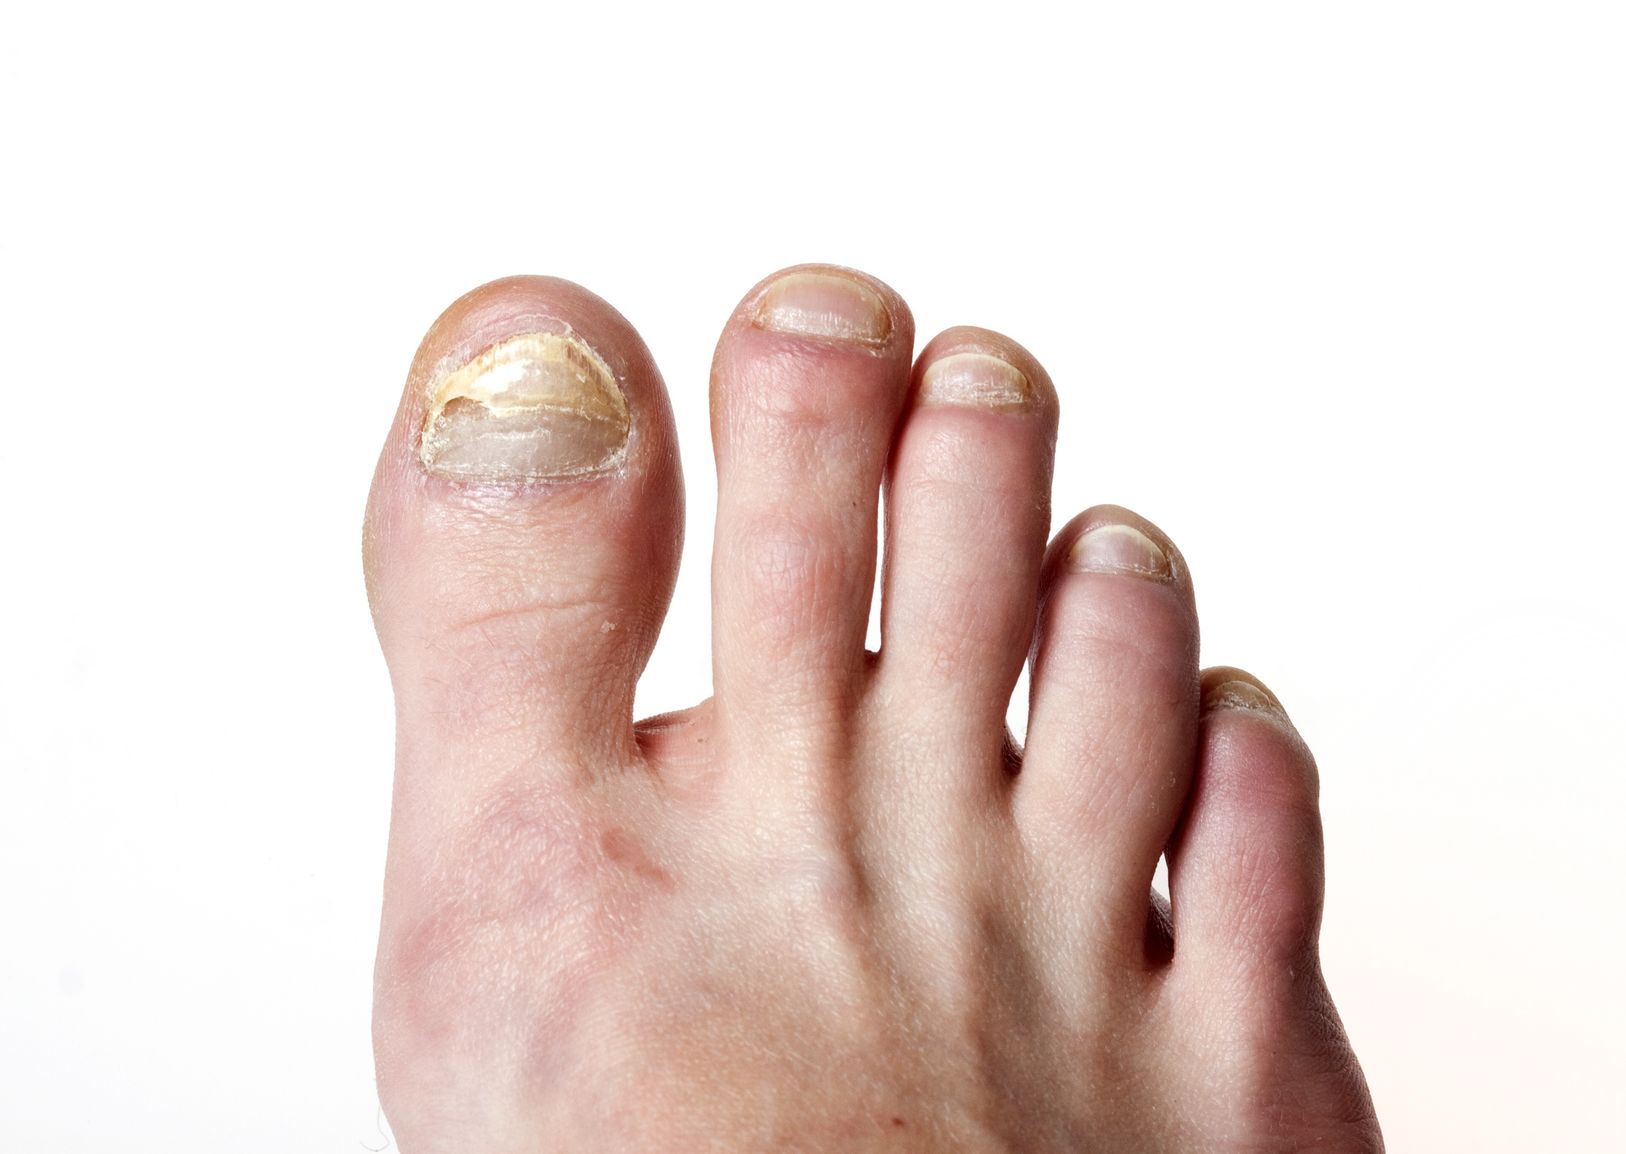 The Worst of the Worst: How Bad Can Nail Fungus Get? | GNFO